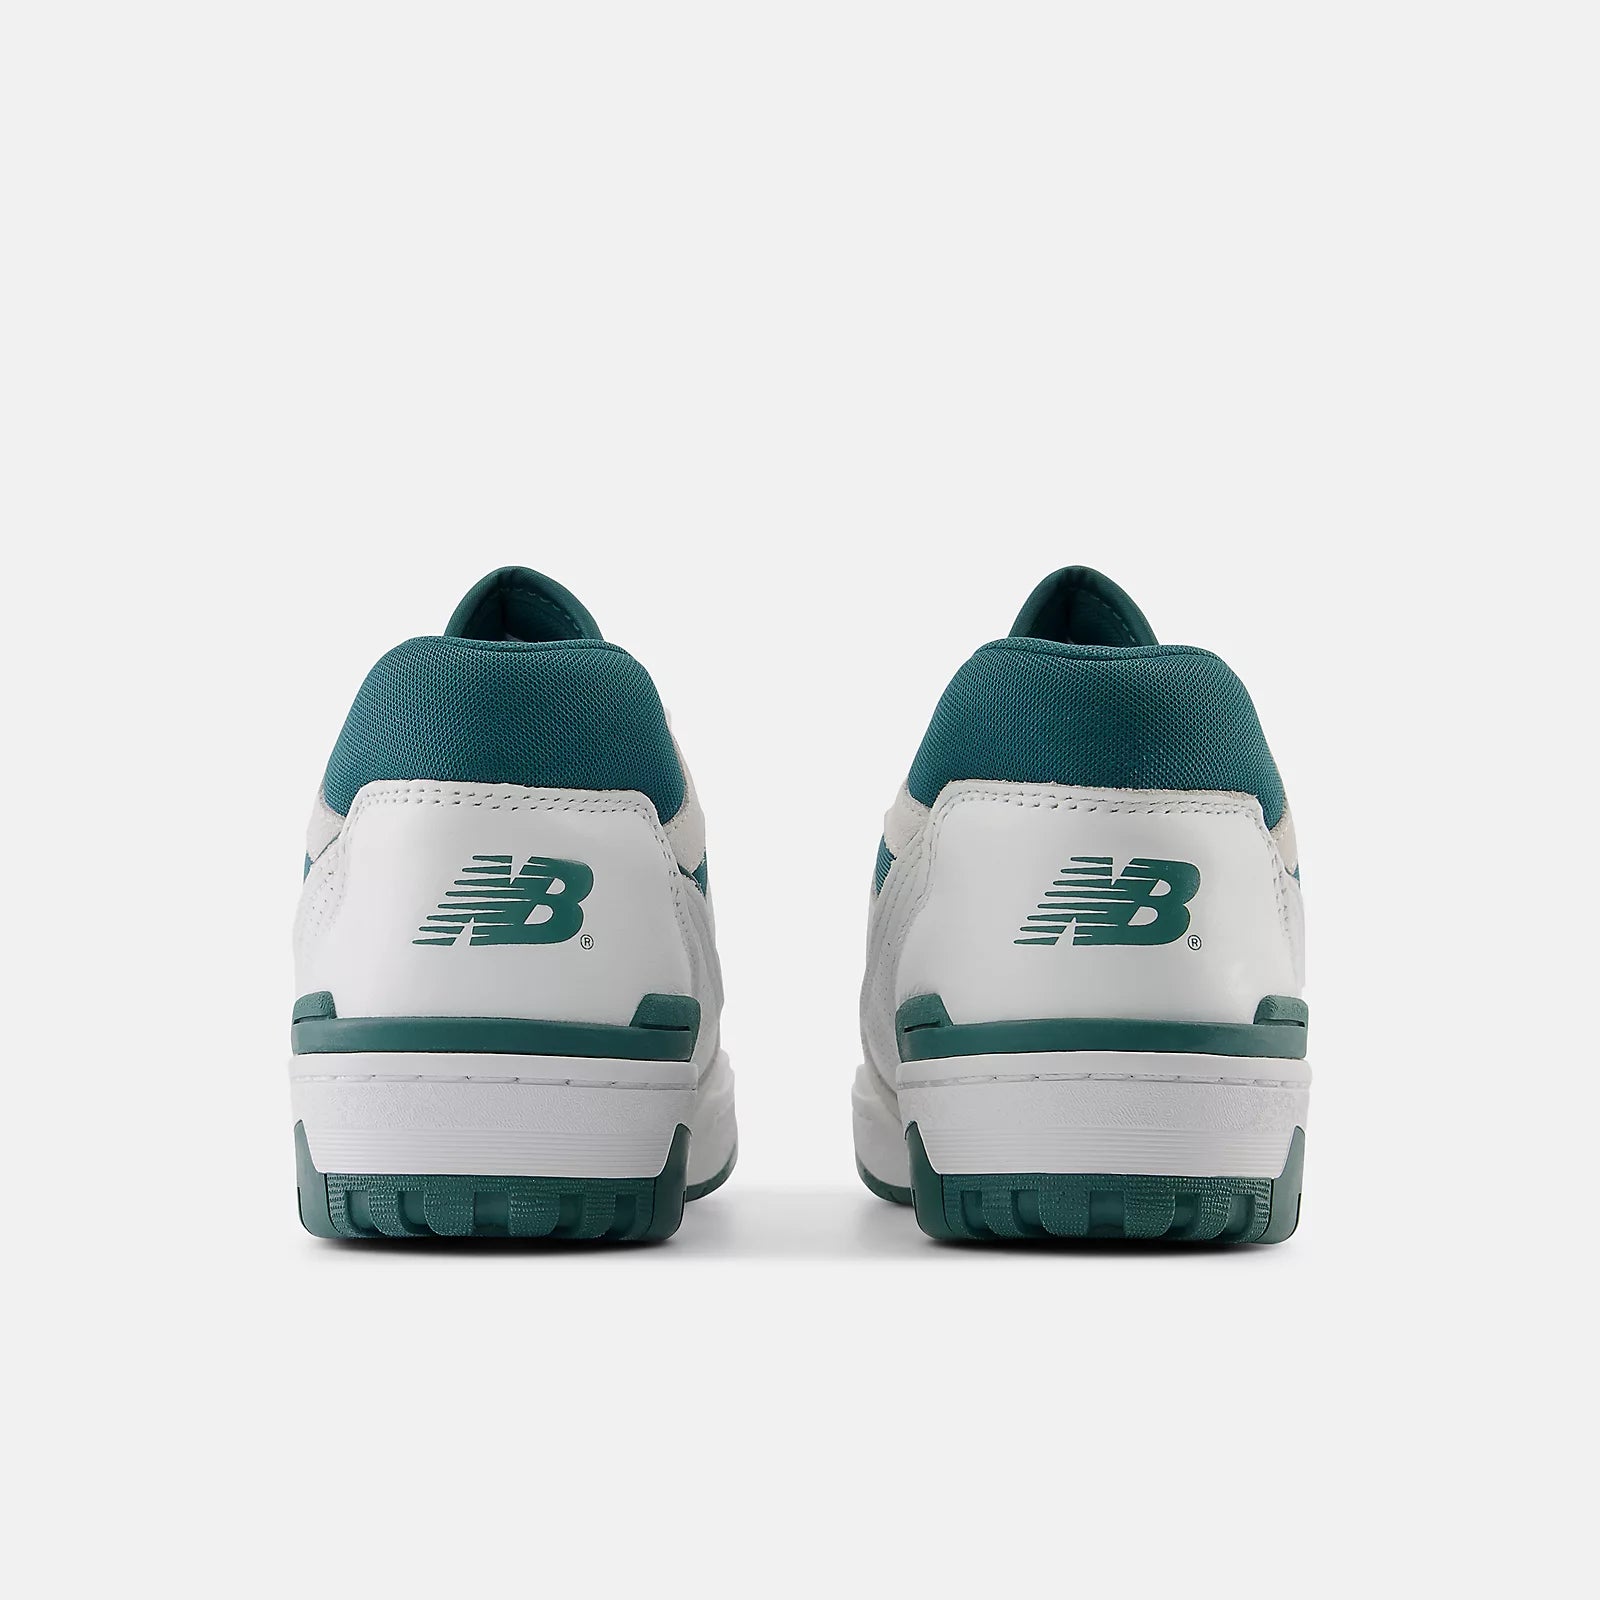 NEW BALANCE Unisex Sneakers BB550 White/Teal